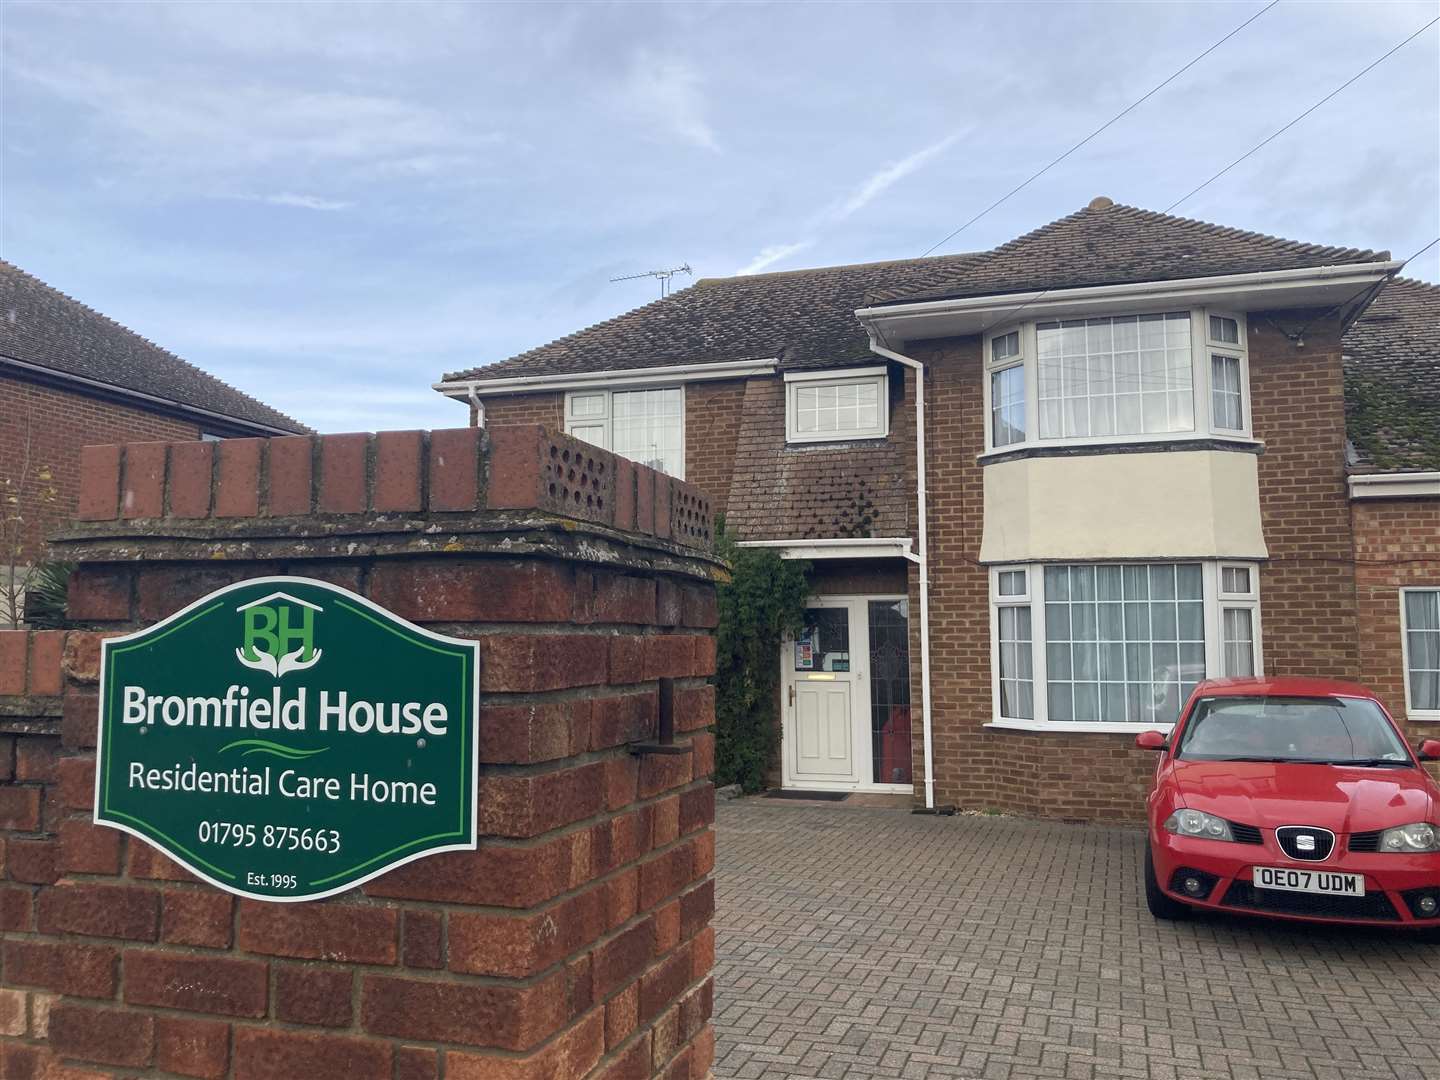 Bromfield House residential home is to close